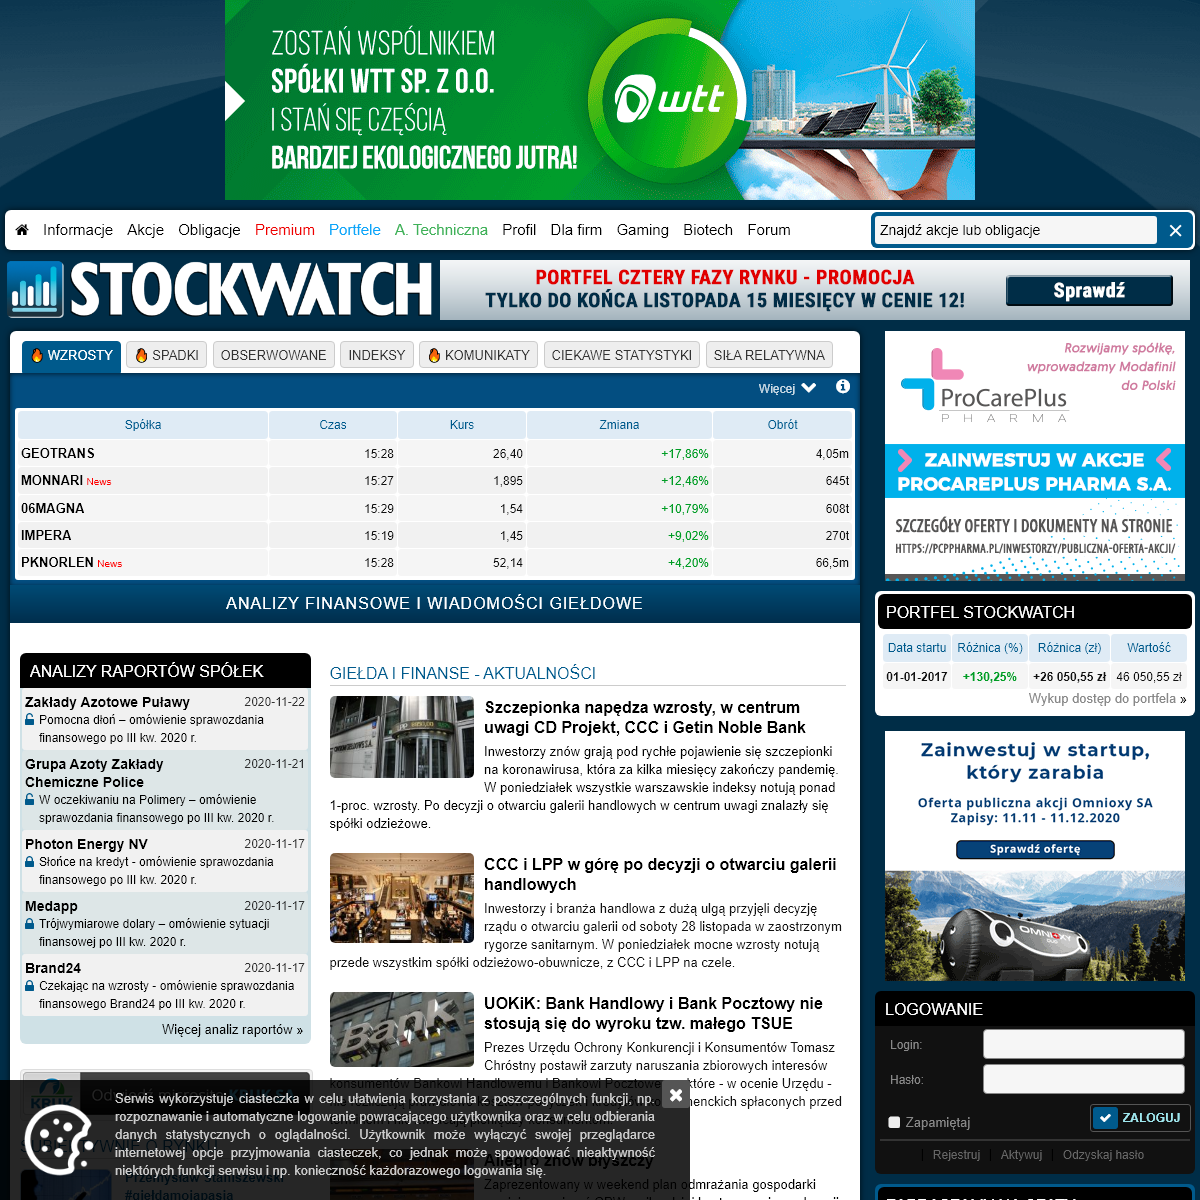 A complete backup of stockwatch.pl